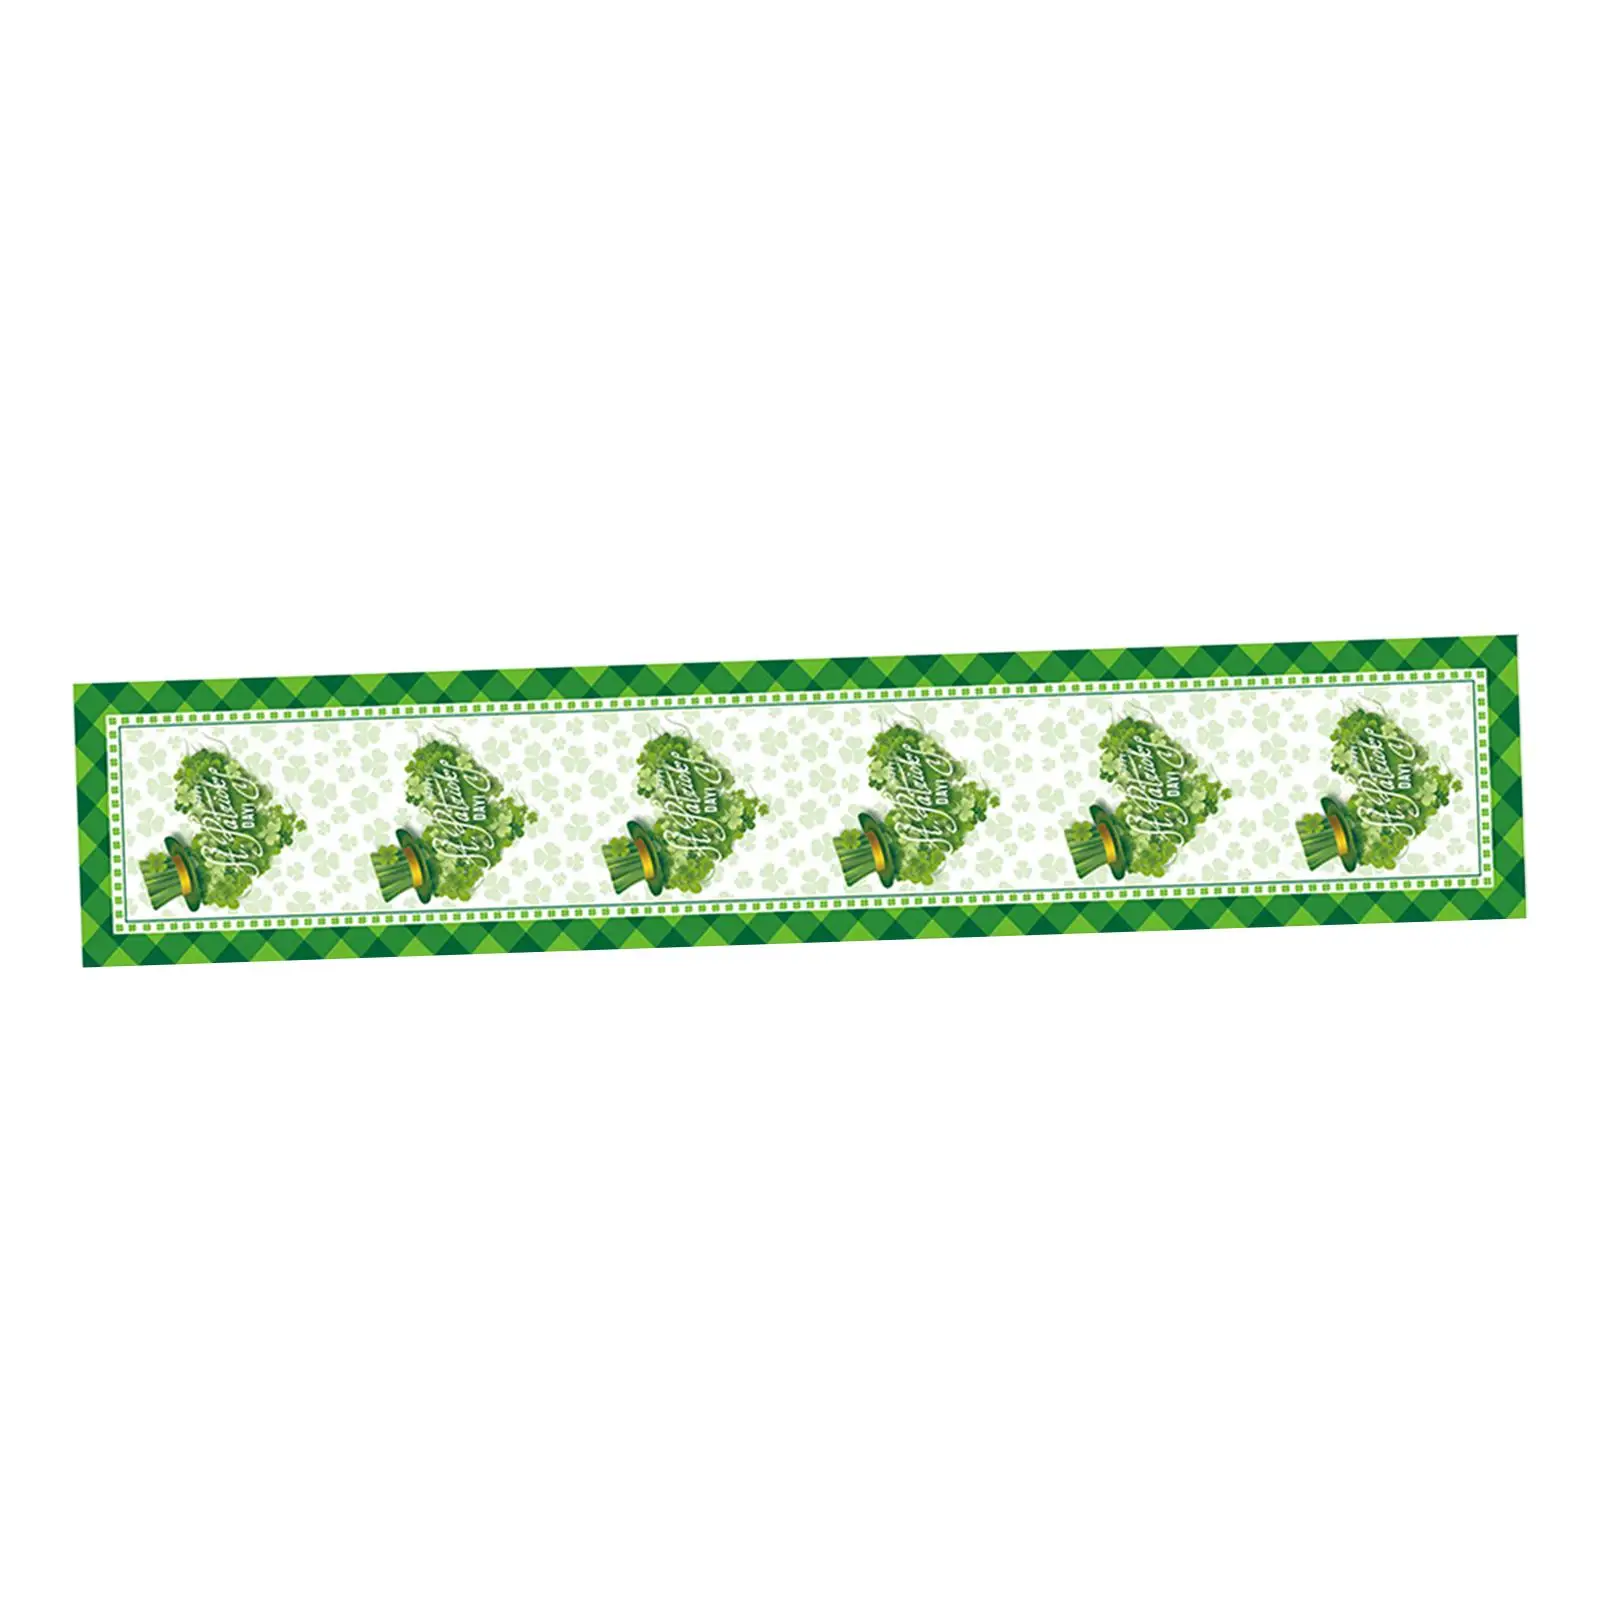 St.`s Day Table Linens, Spring Shamrocks Clovers, Table Runners, Tablecloths